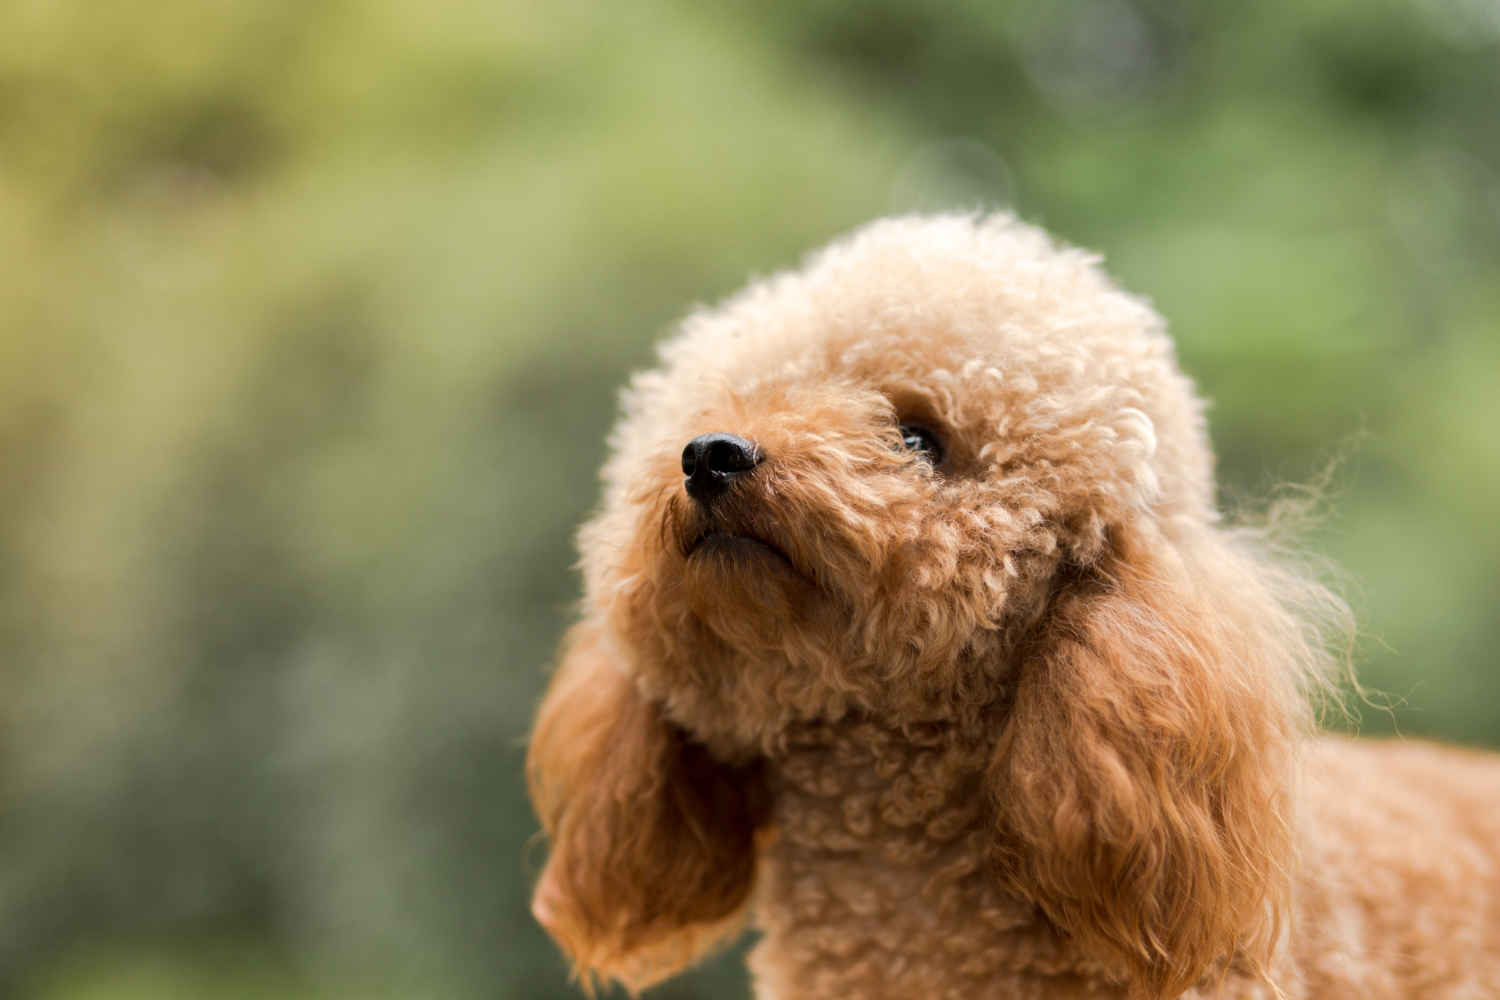 Can Poodles develop heart murmurs? What treatment options exist for this condition?